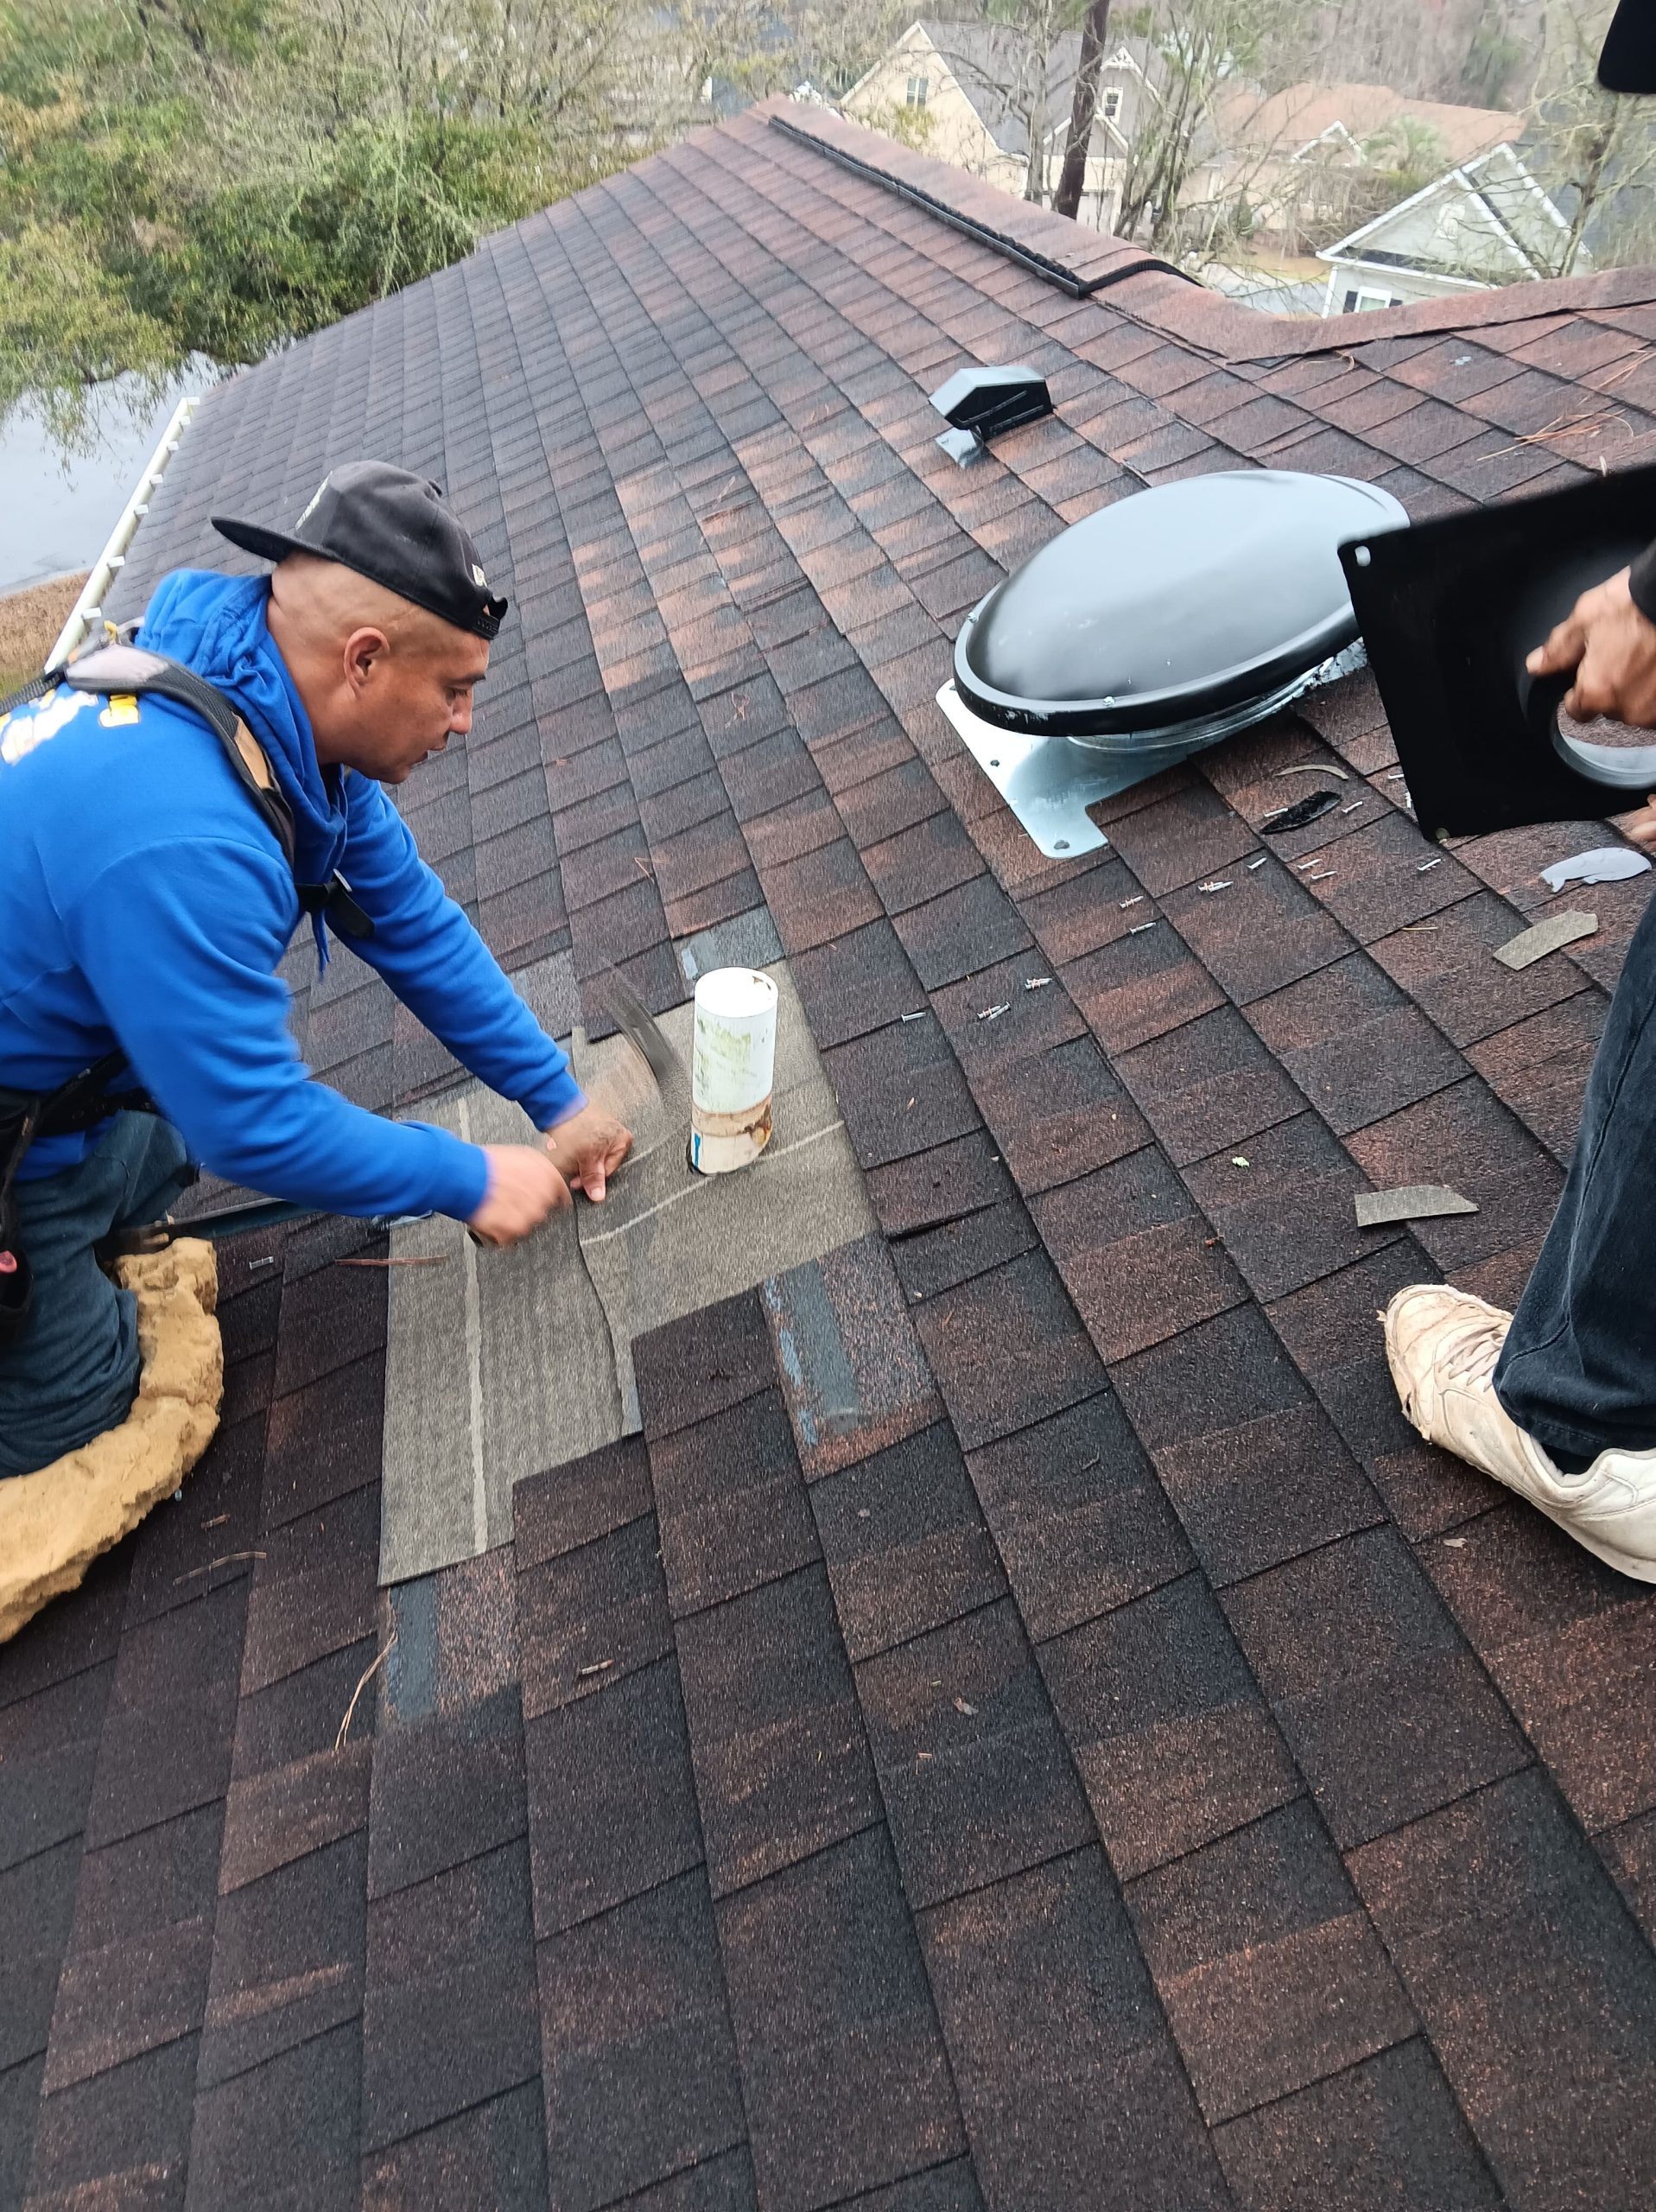 Roofing a house in North Carolina